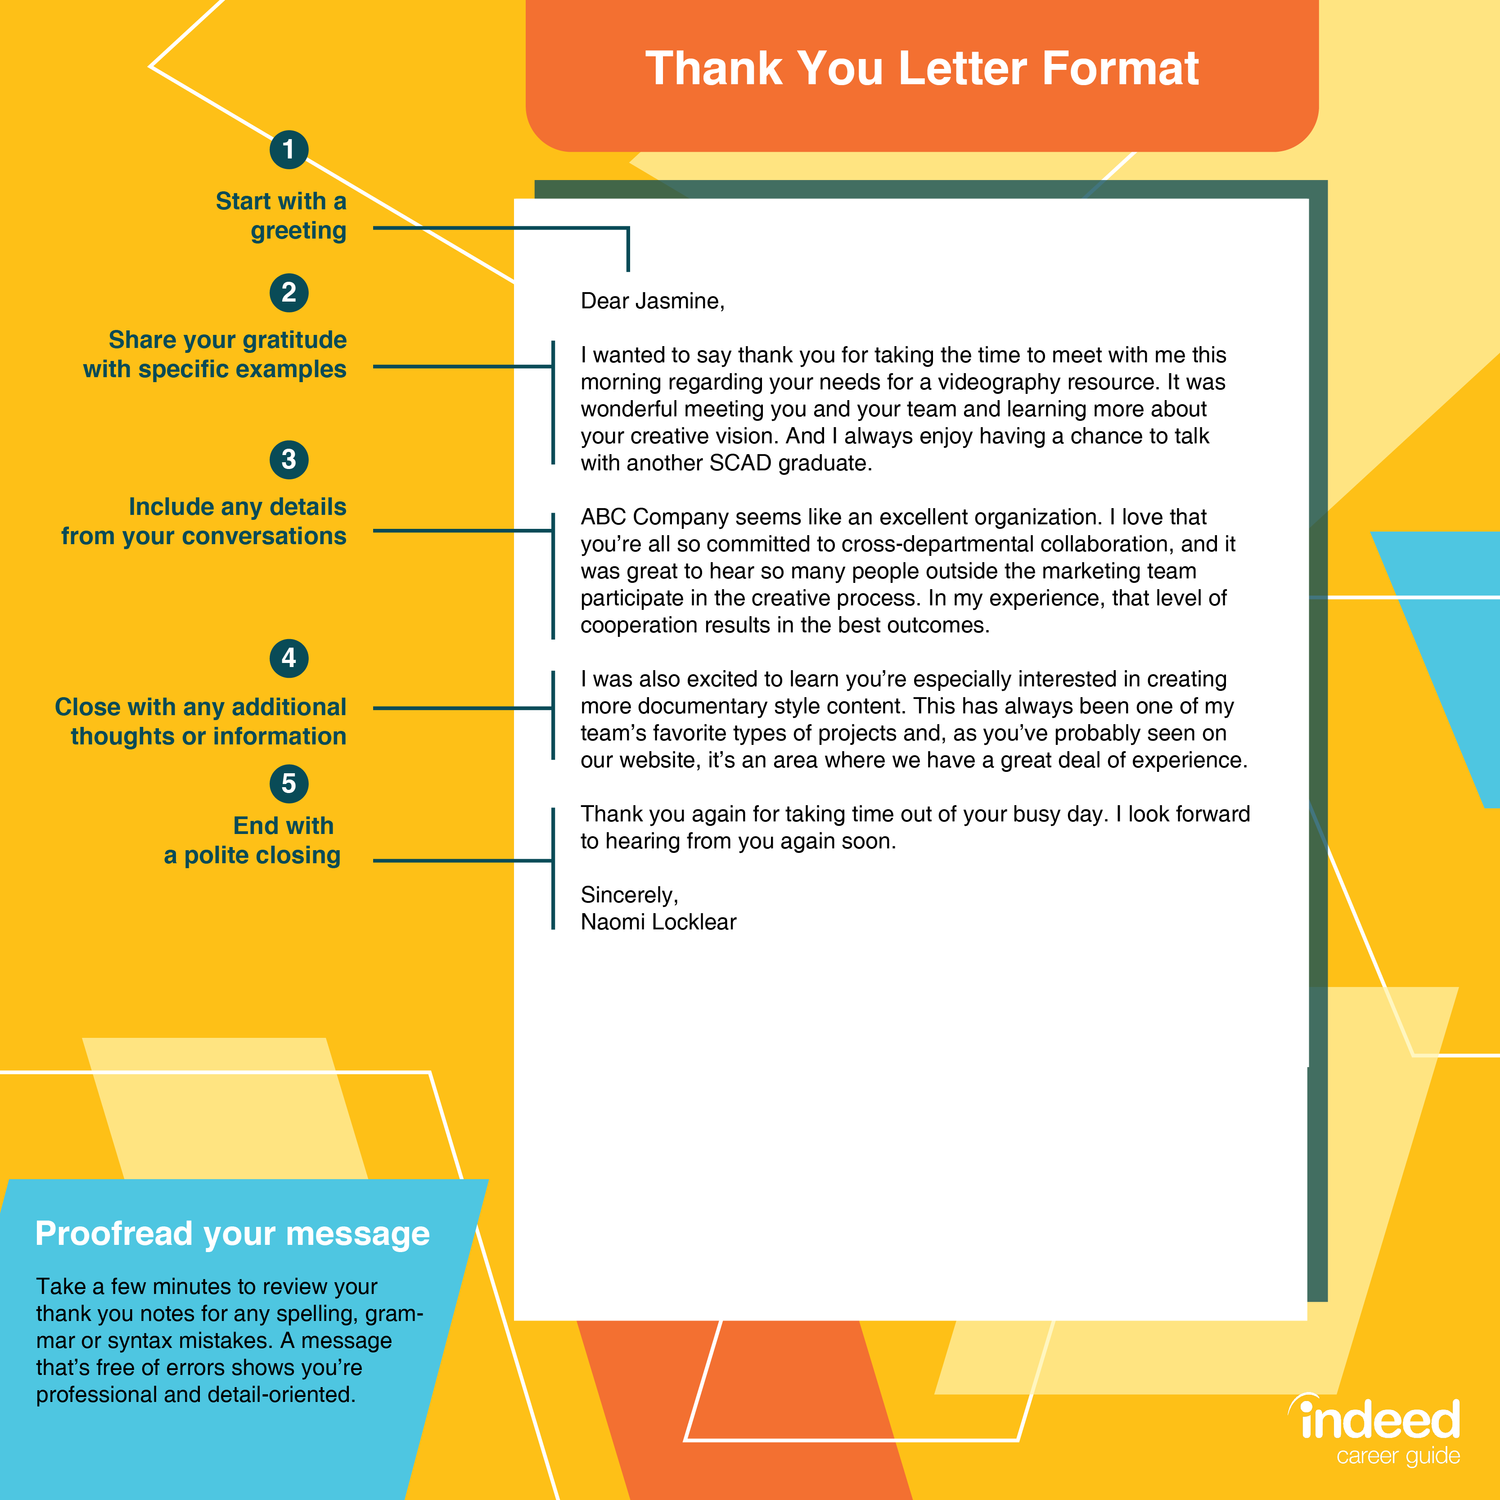 How To Write a Thank You Letter to Your Mentor (With Examples) 